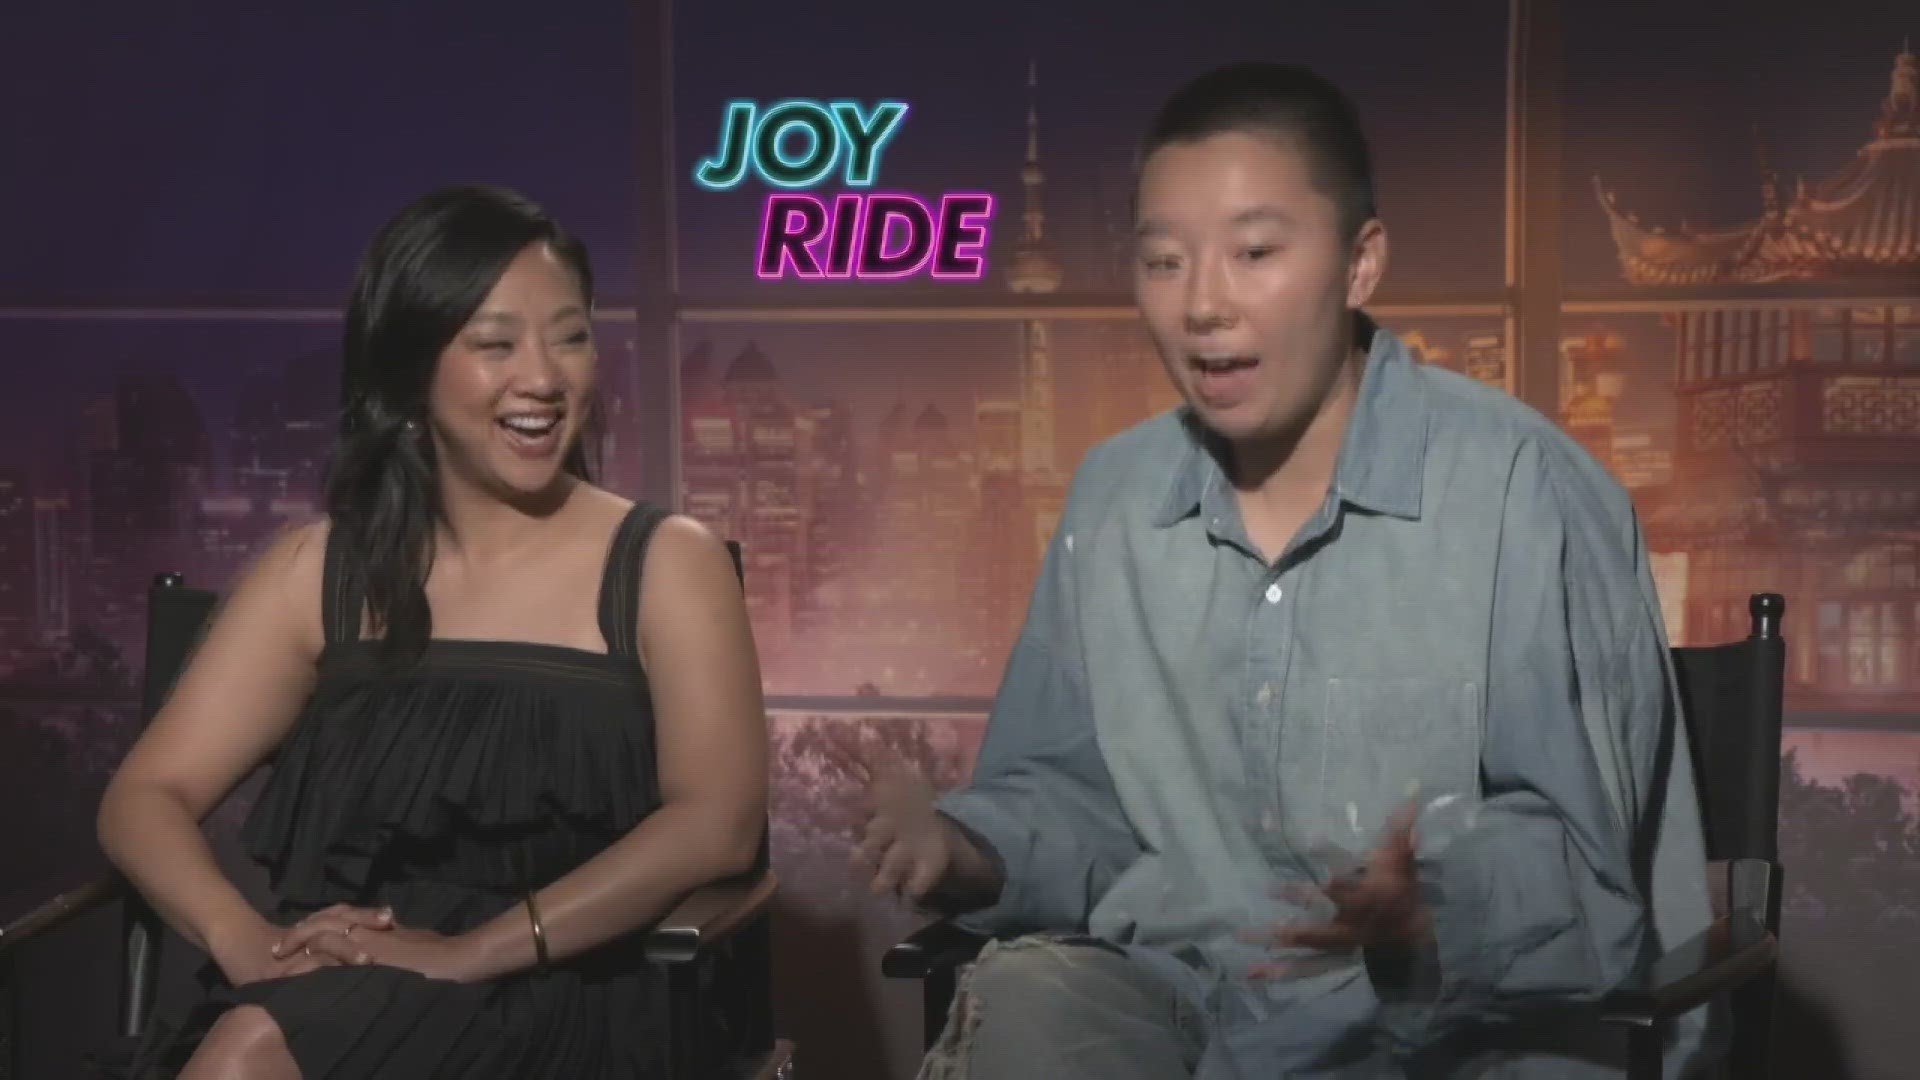 ABC10's Mark S. Allen catches up with the stars of the newly-released film "Joy Ride".